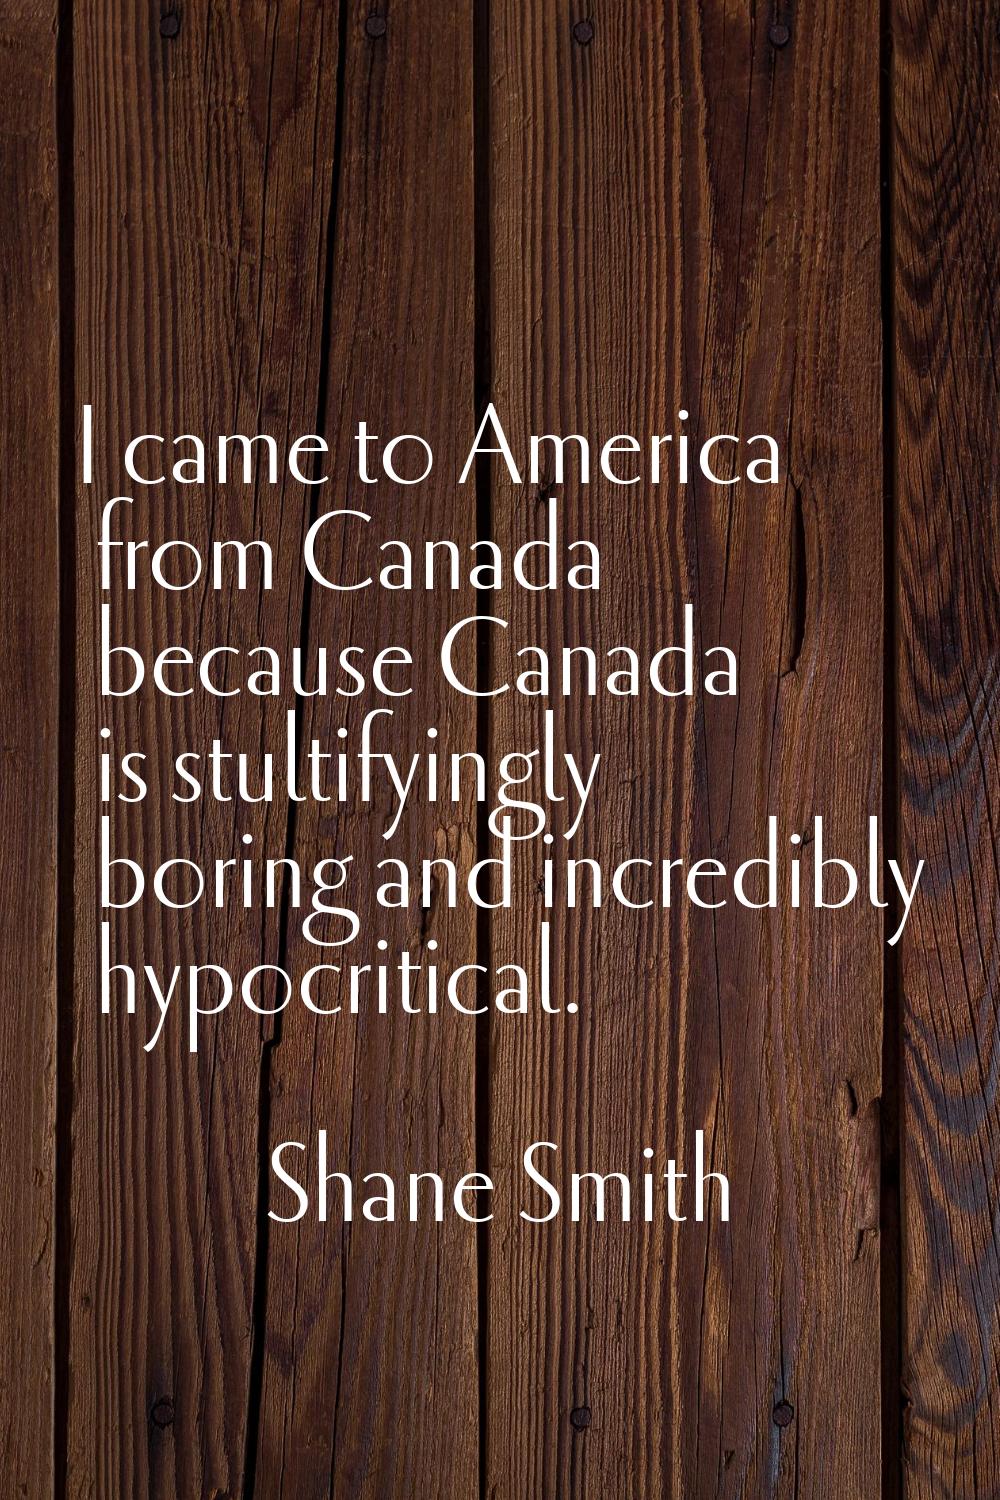 I came to America from Canada because Canada is stultifyingly boring and incredibly hypocritical.